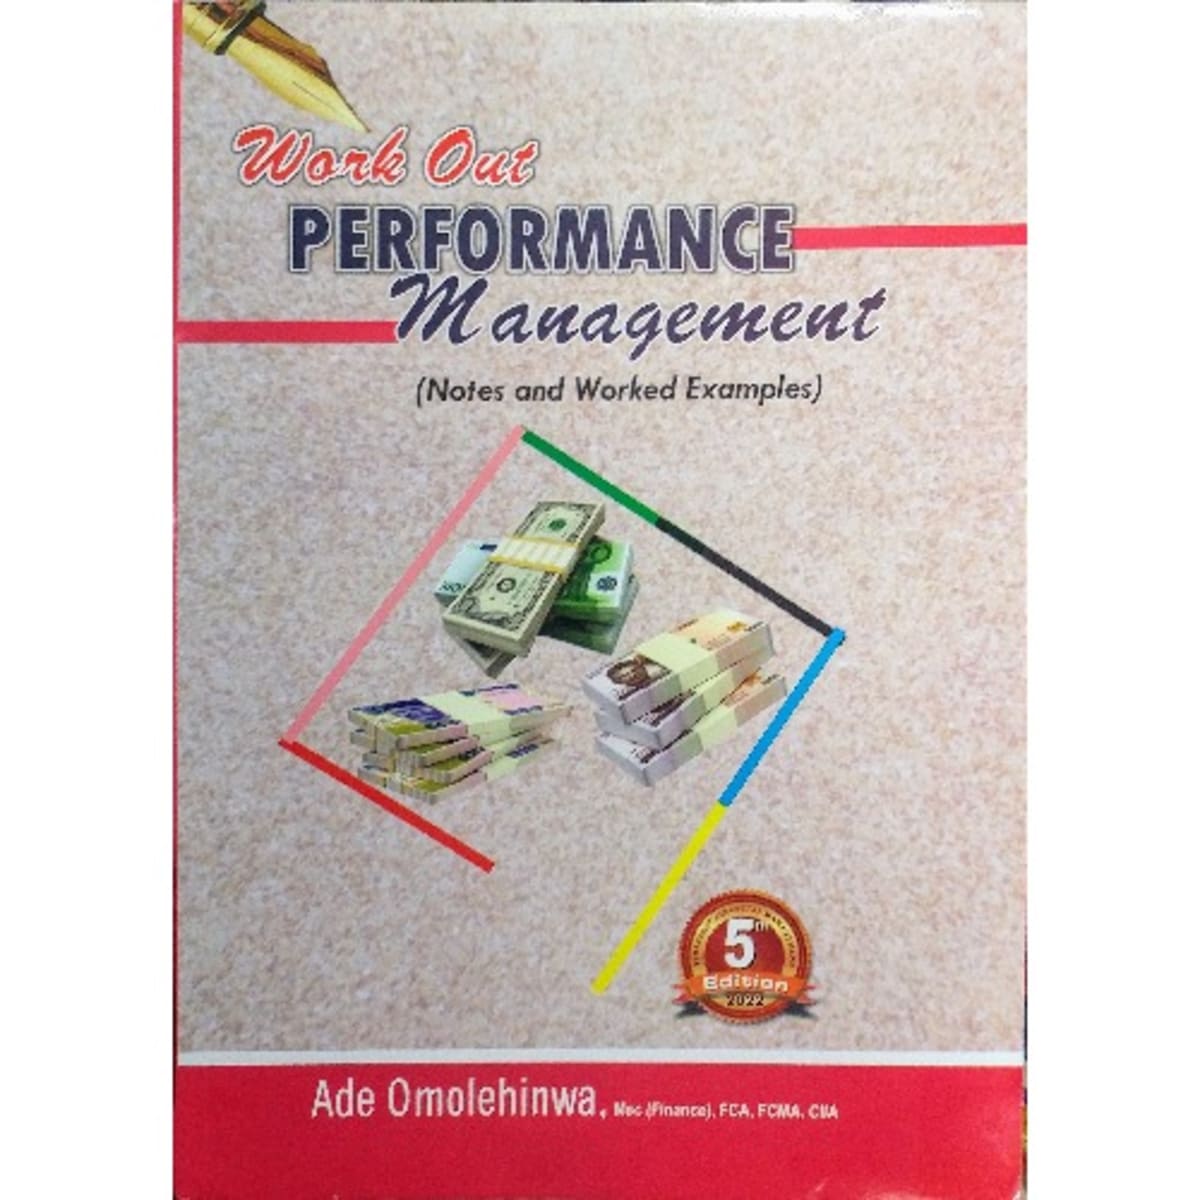 Omolehinwa　Online　Notes　Performance　Worked　Work　Konga　Management:　Edition　by　Ade　5th　Out　Examples,　And　Shopping